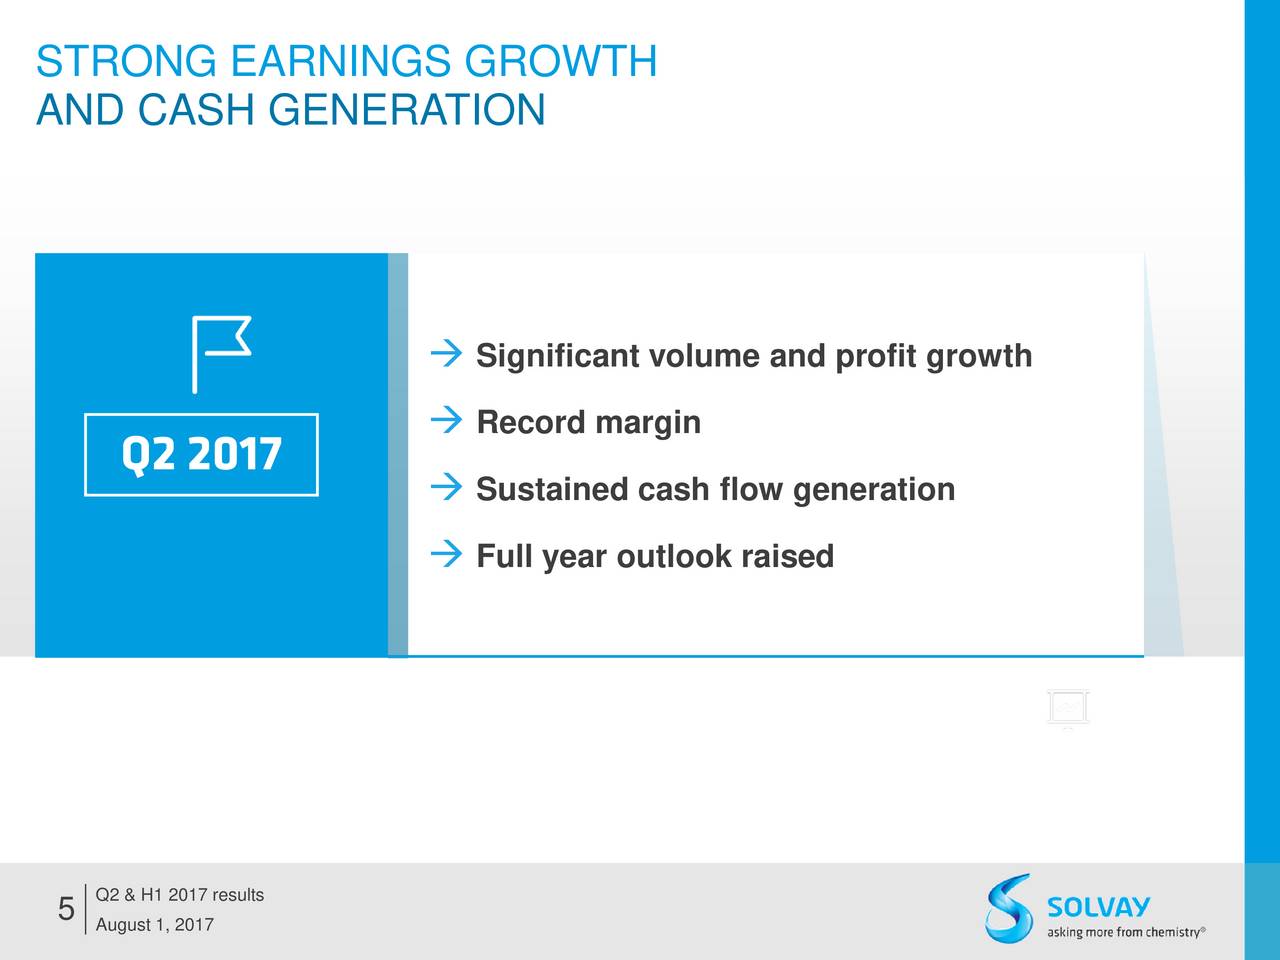 STRONG EARNINGS GROWTH